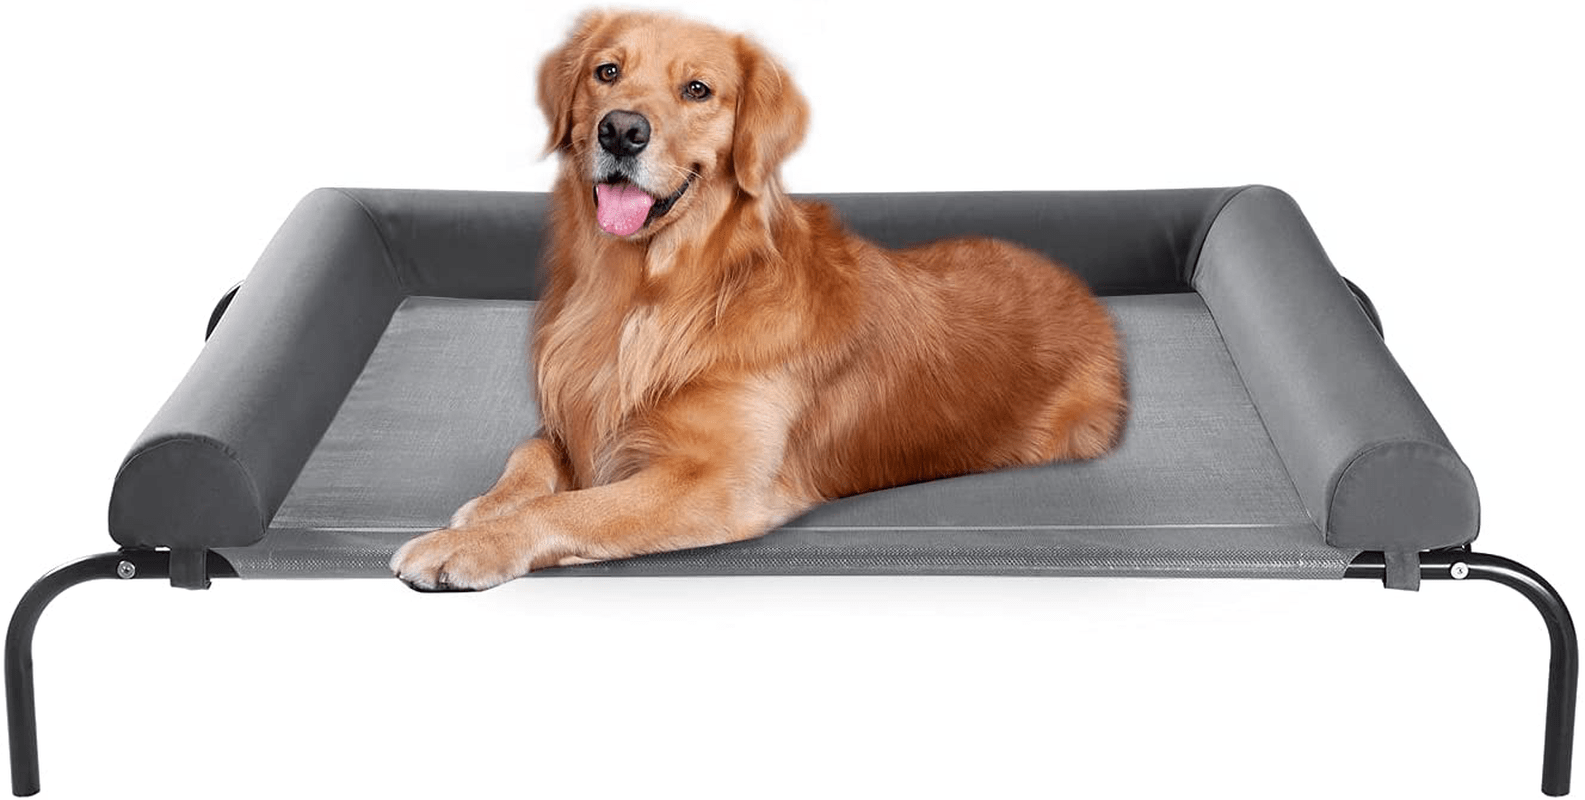 Western Home Elevated Dog Bed Cot with Bolster , Raised Outdoor Dog Bed for Large Dogs, Slightly Chew Proof Cooling Washable Pet Cot with Breathable Mesh, Skid-Resistant Feet, Grey